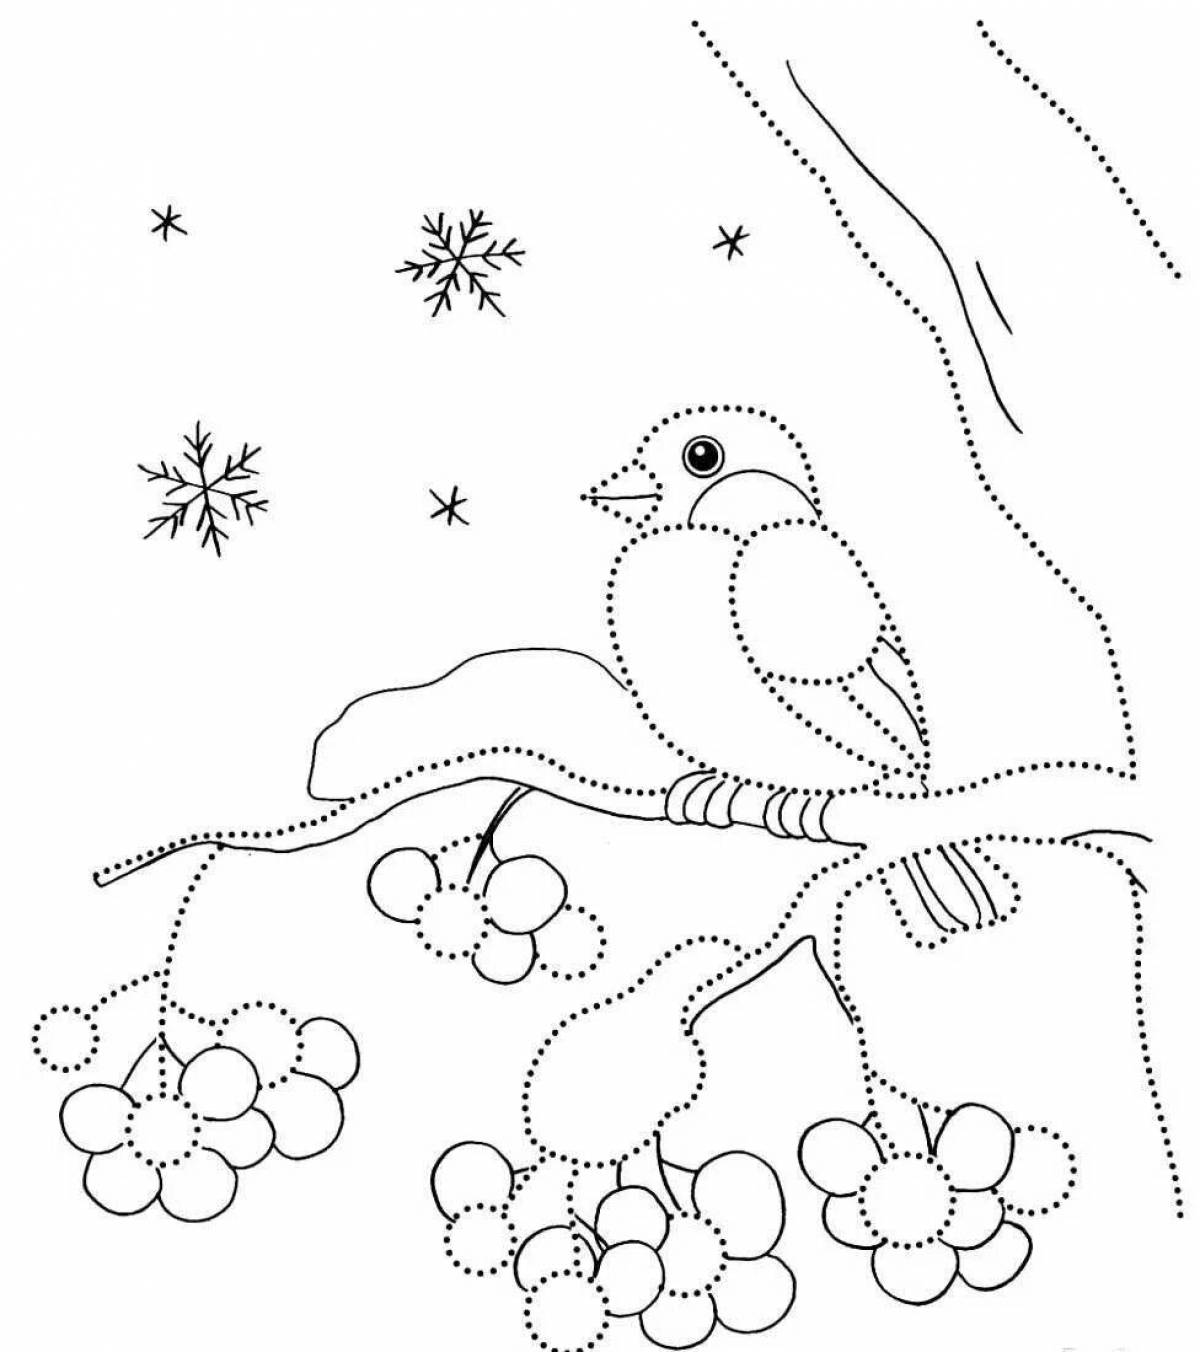 Playful winter animal coloring page